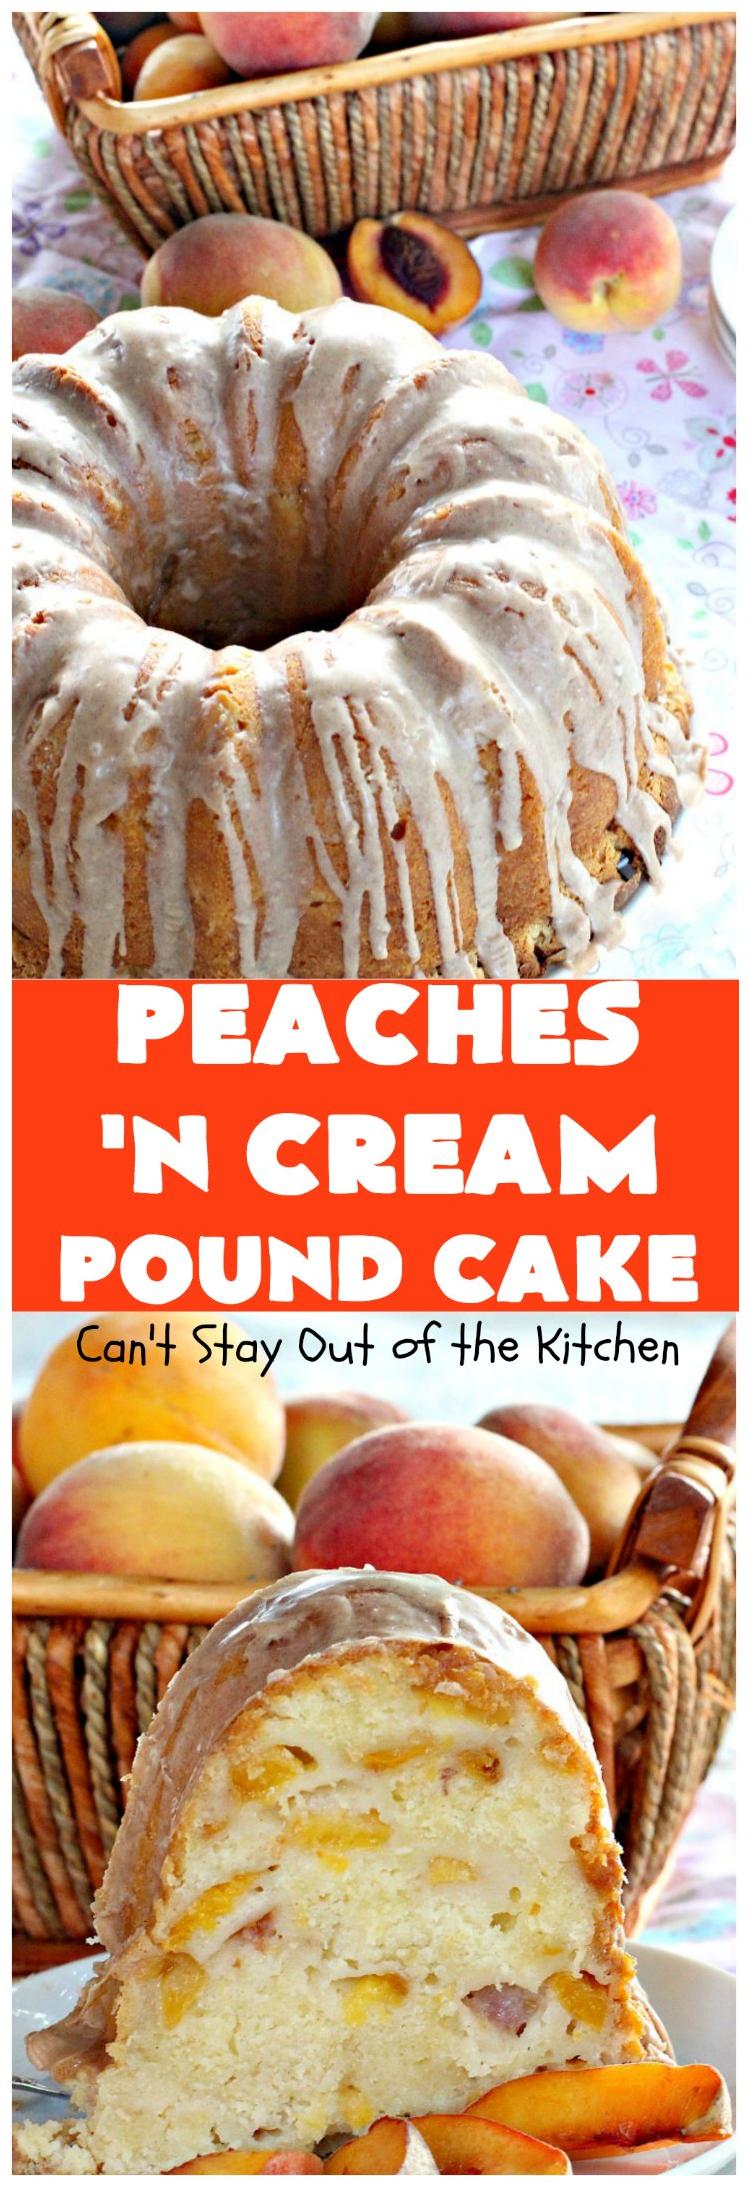  Longing for summer? This pound cake will take you there